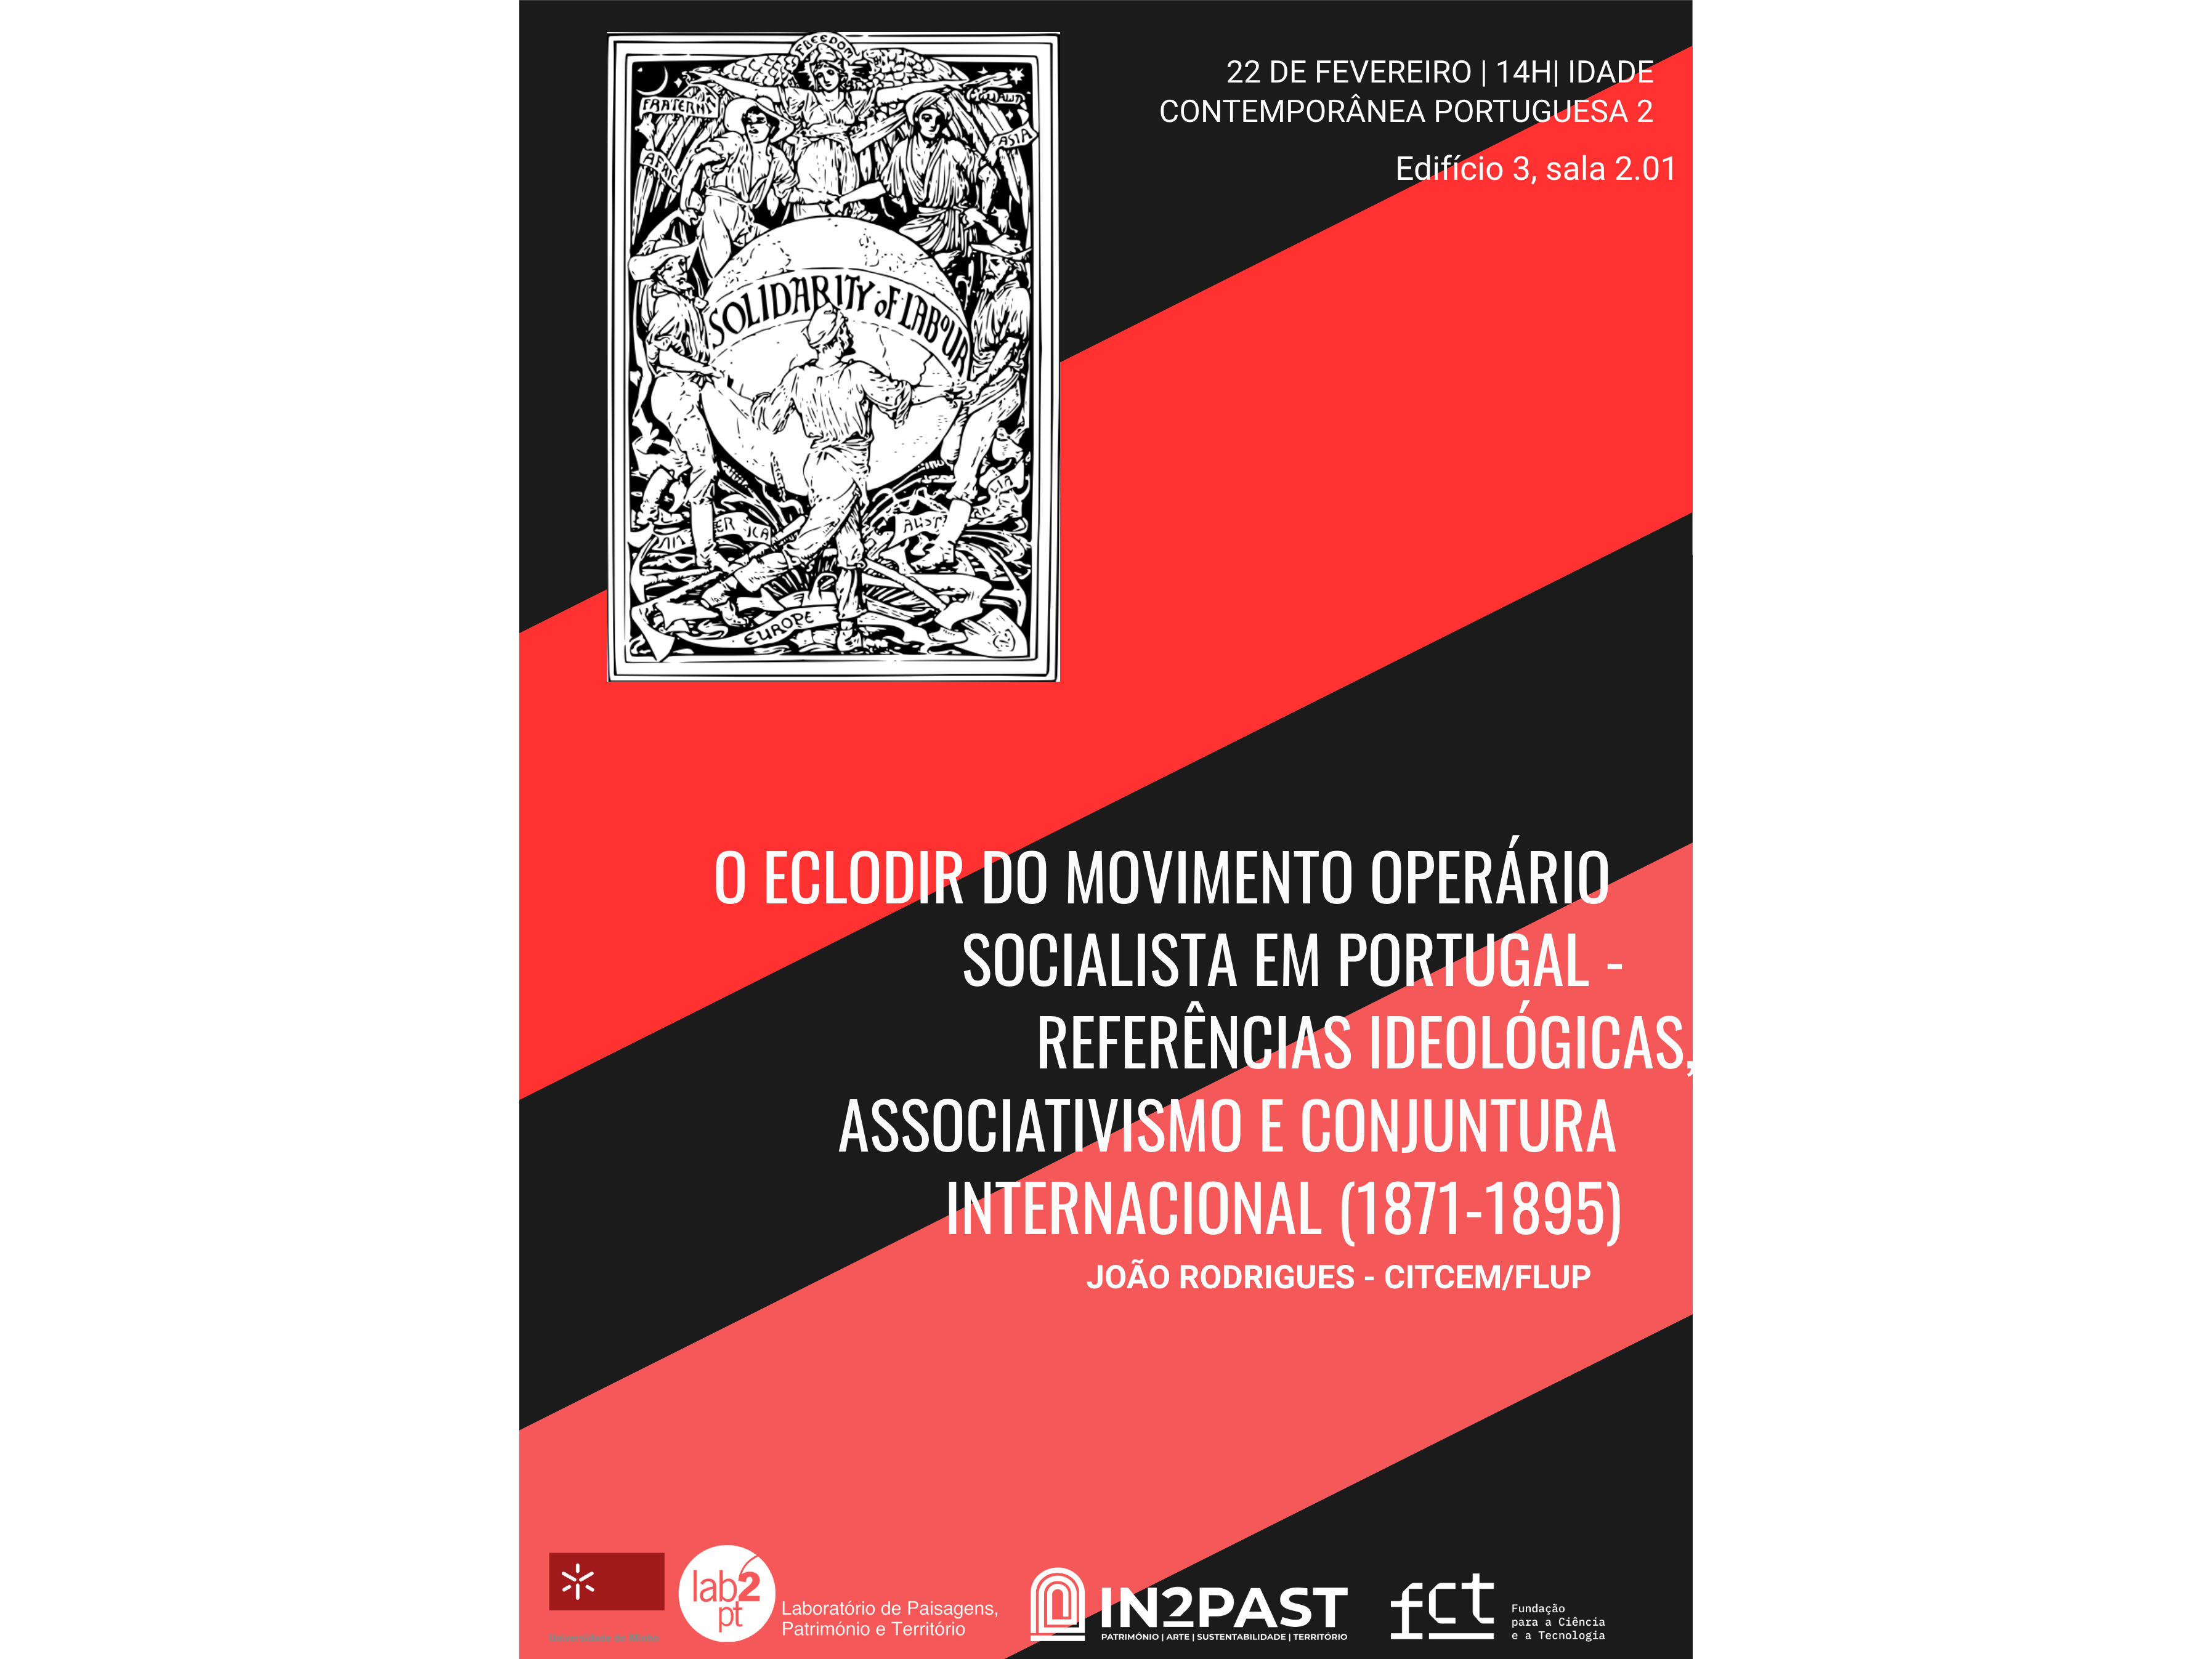 The emergence of the socialist labour movement in Portugal - ideological references, associations and international conjuncture (1871-1895) image